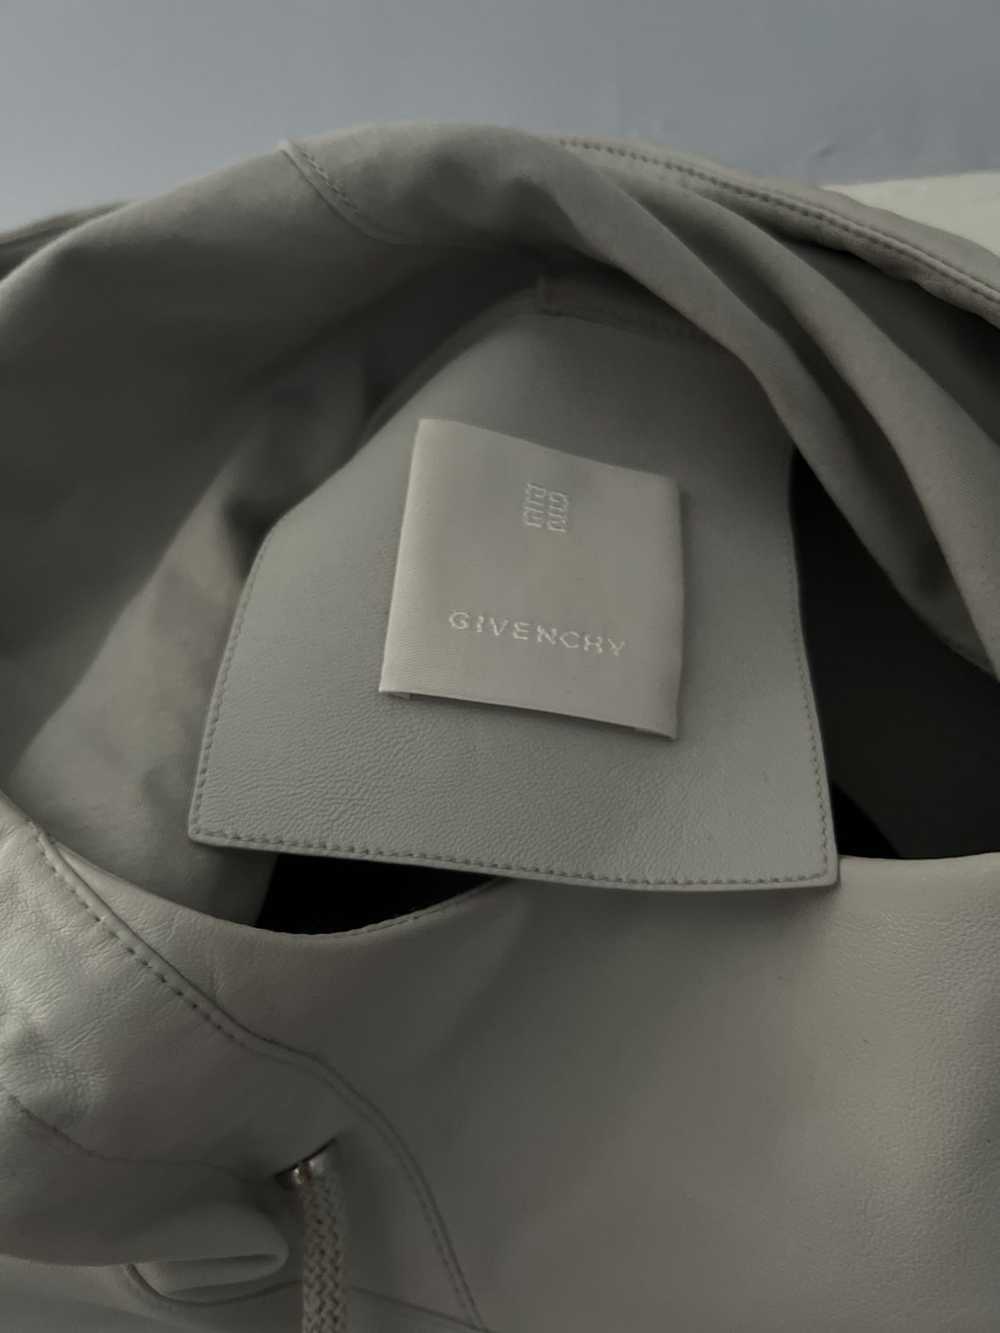 Givenchy Givenchy Grey Lamb Leather Hoodie - image 7